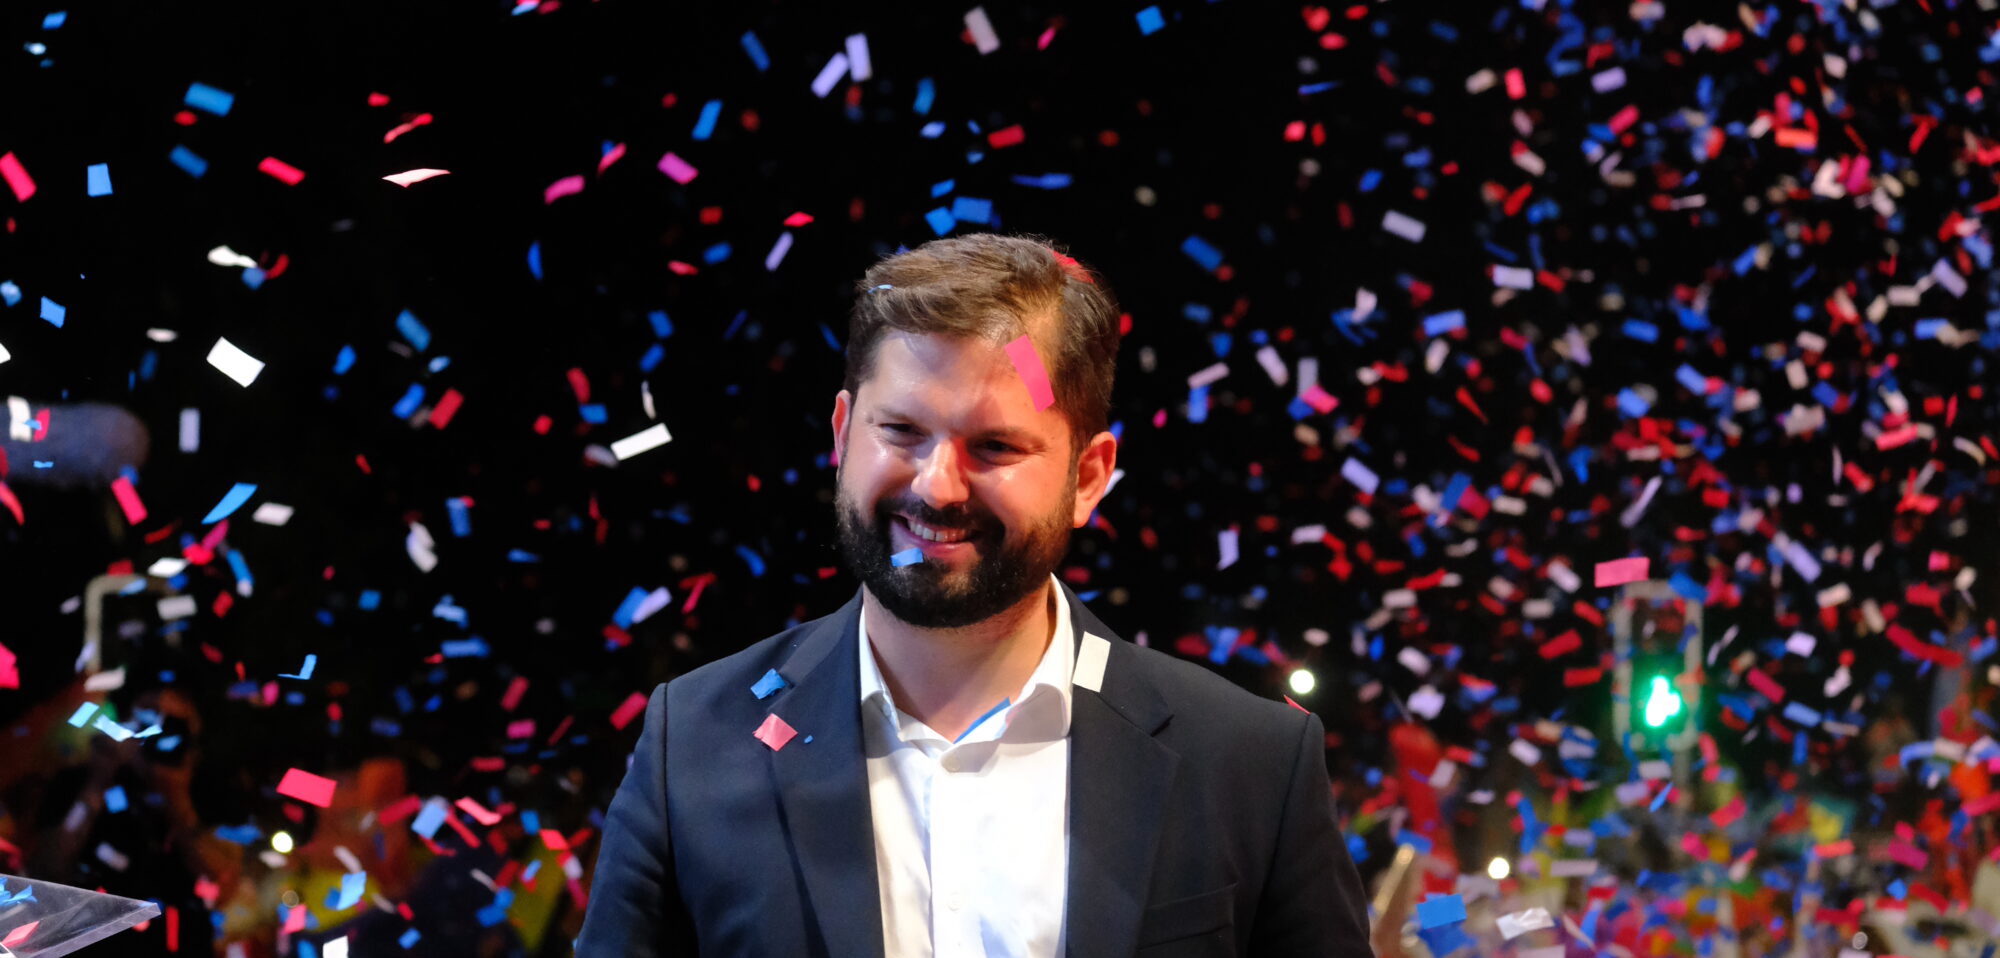 Gabriel Boric smiling amidst red, white and blue papers